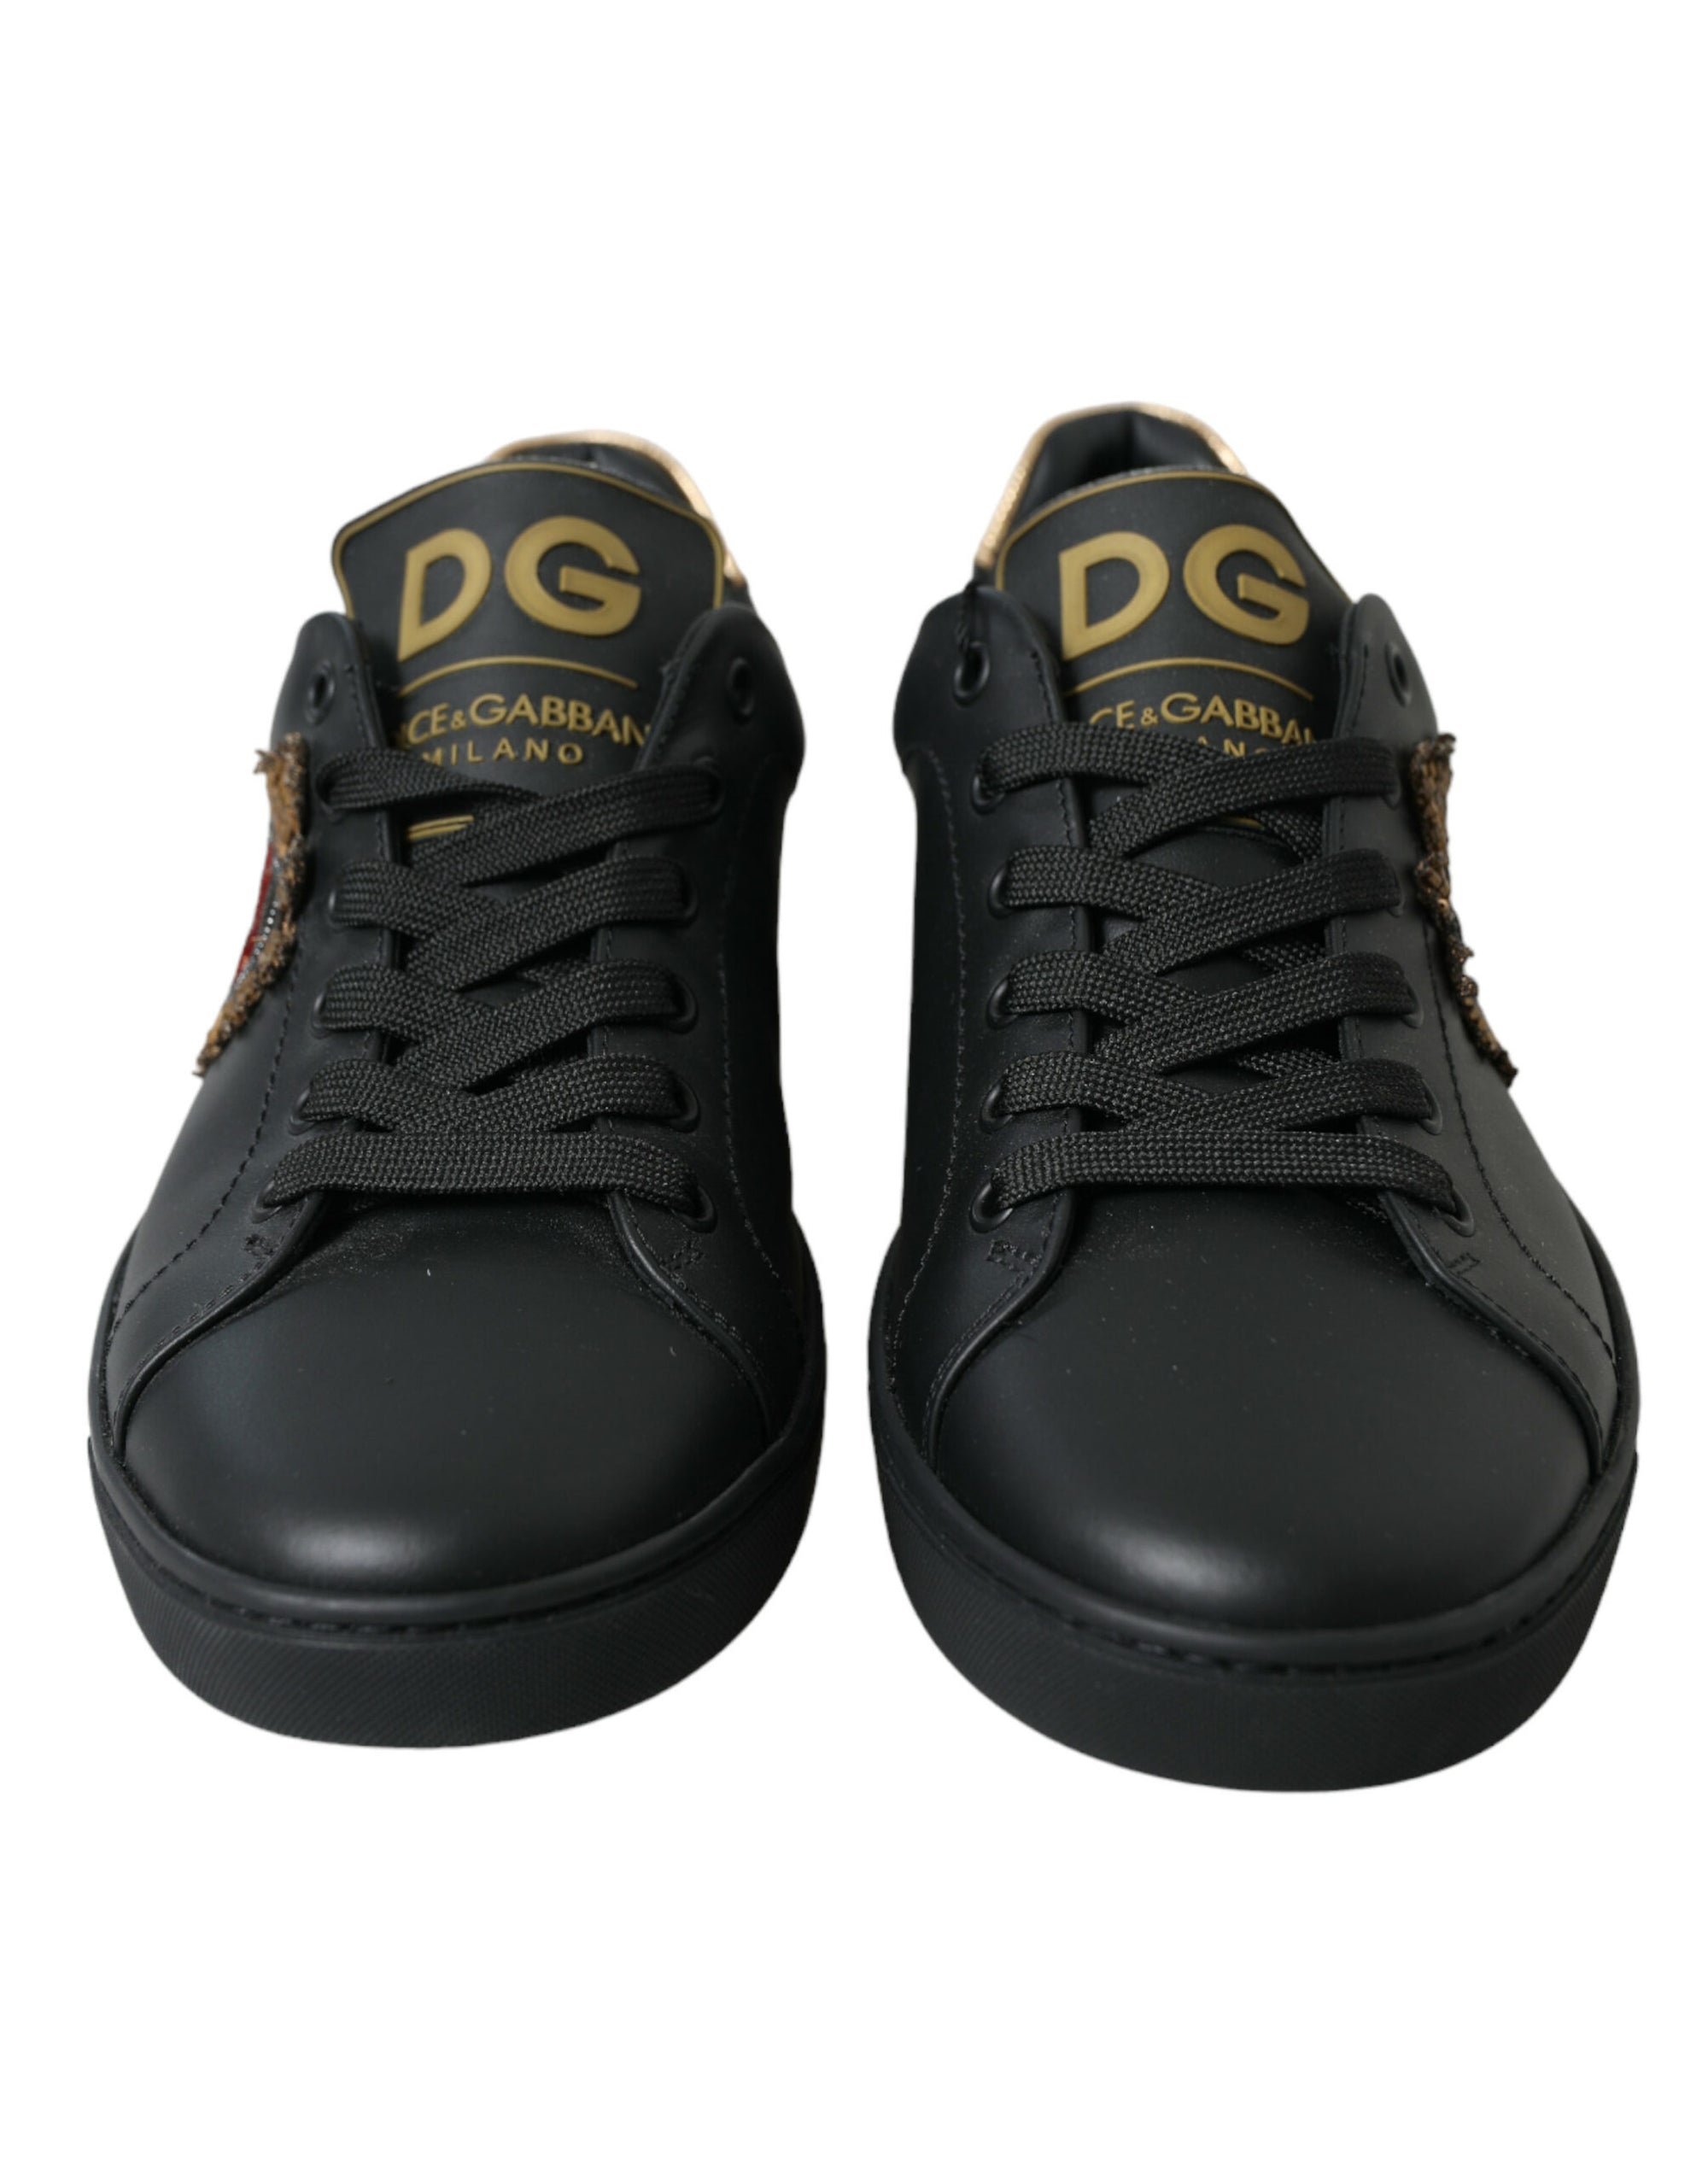 Elegant Black and Gold Leather Sneakers